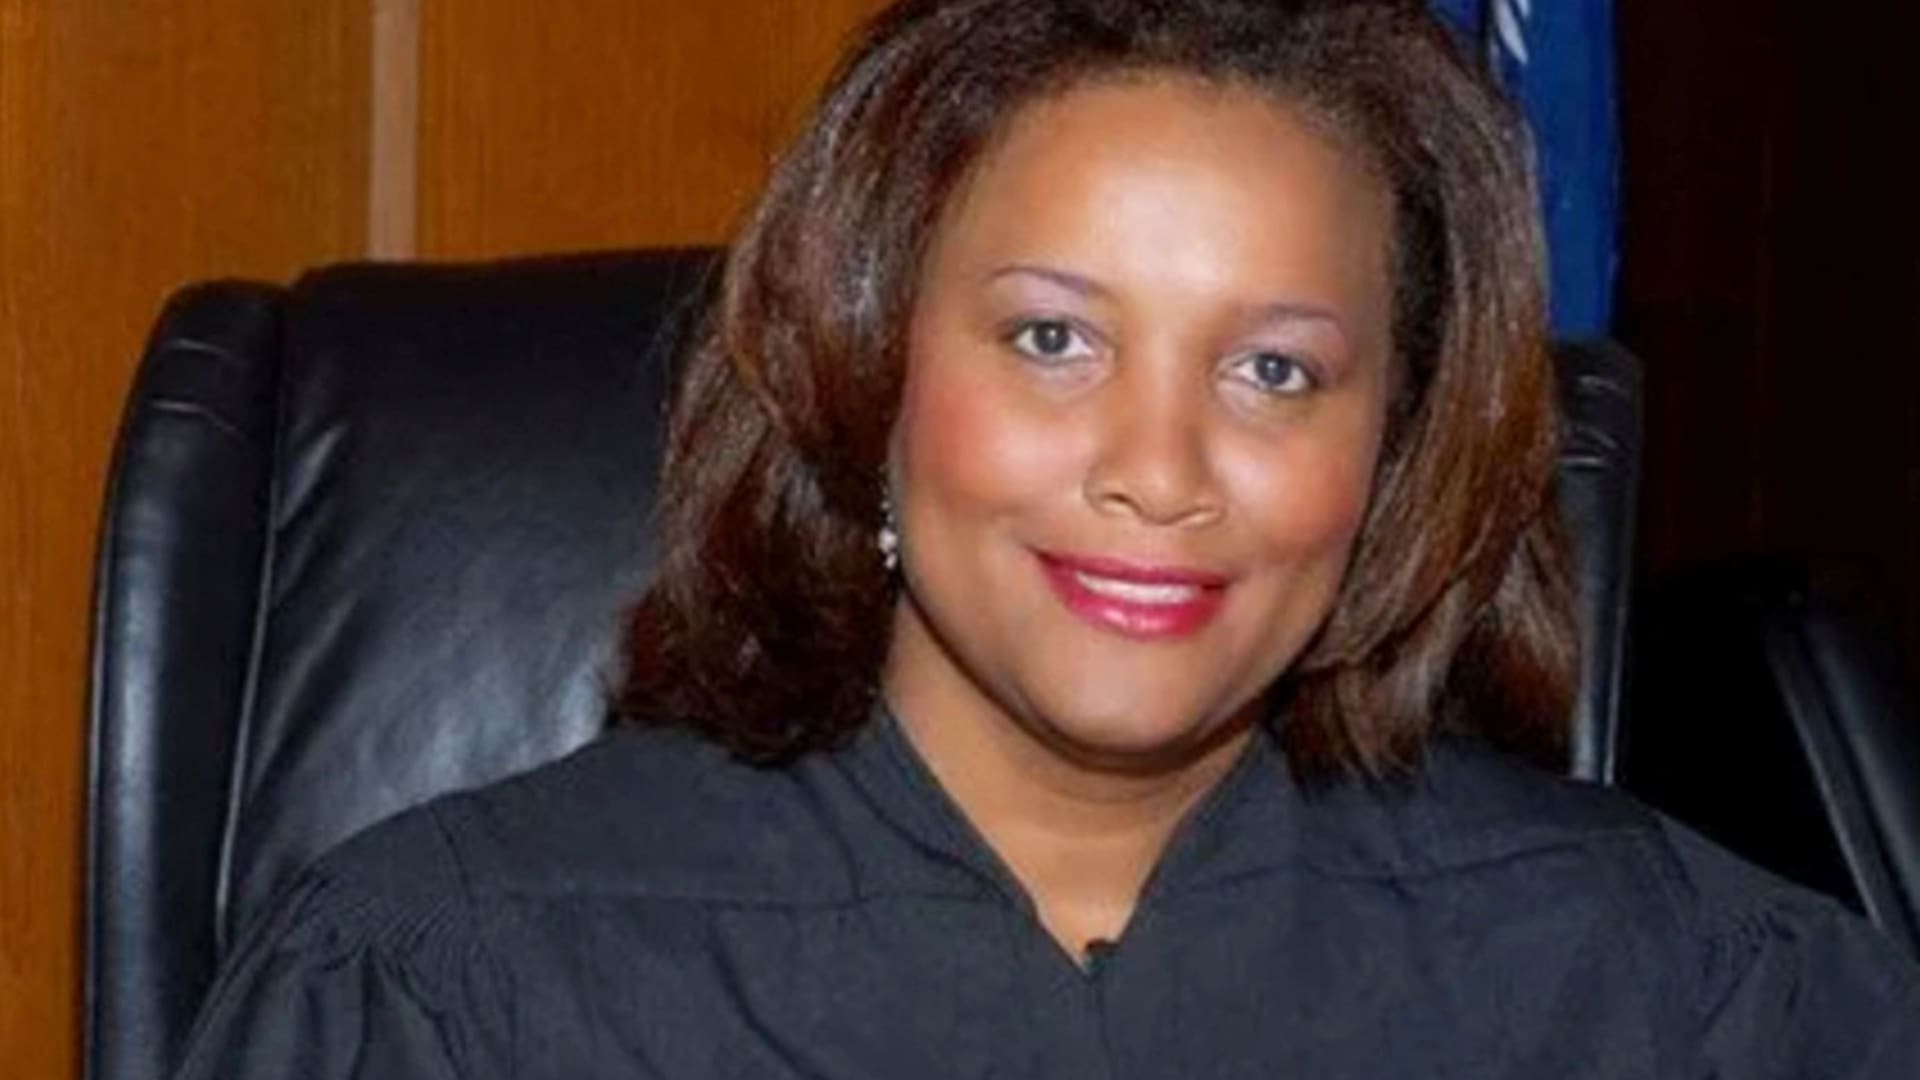 Judge J. Michelle Childs of the United States District Court, District of South Carolina is seen in an undated photo.